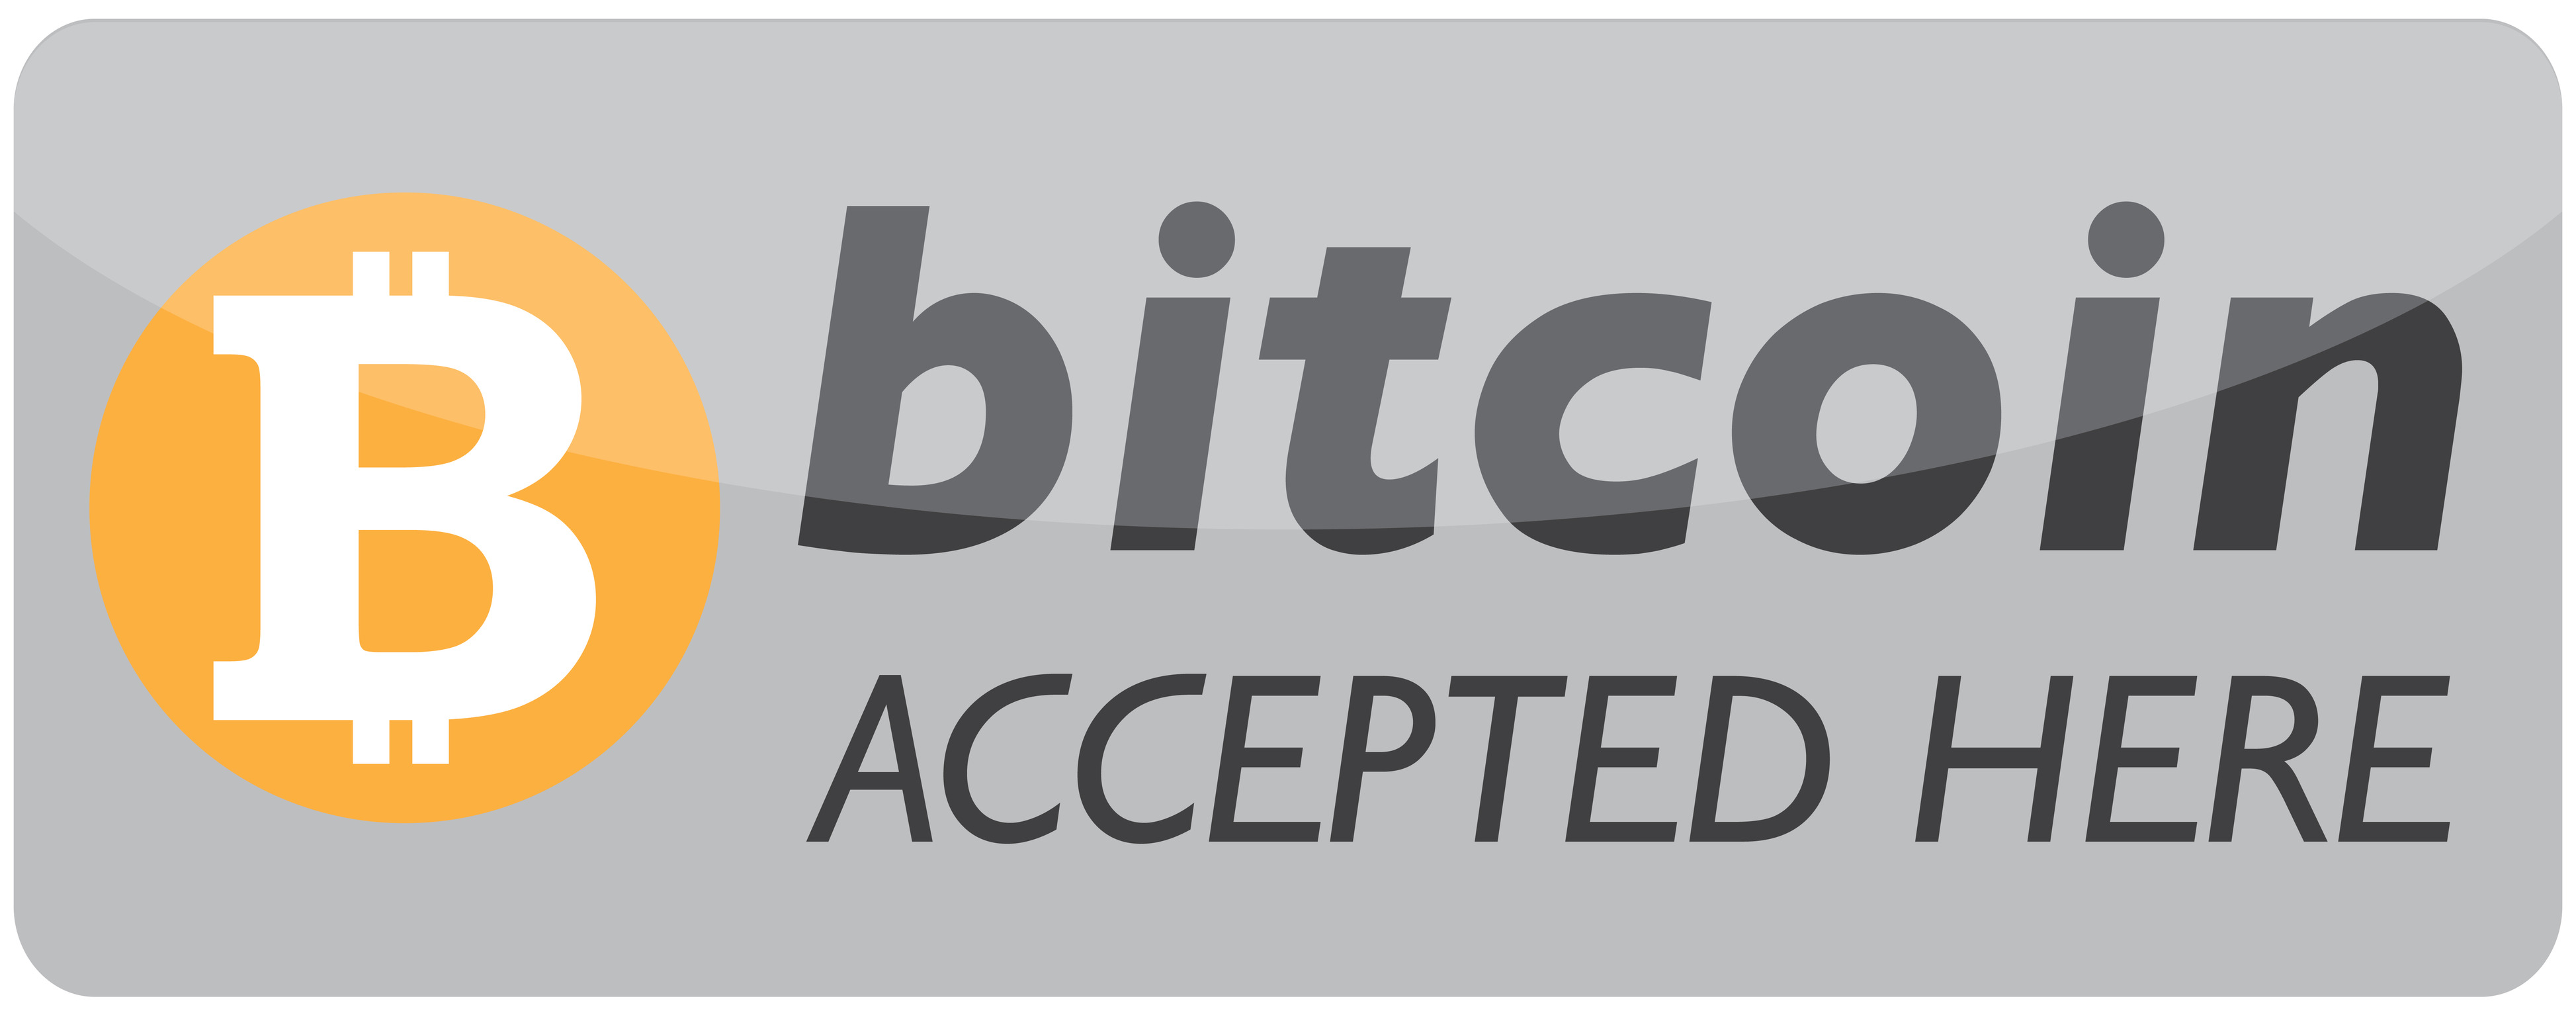 Vector of a sign for web of bitcoin accepted here